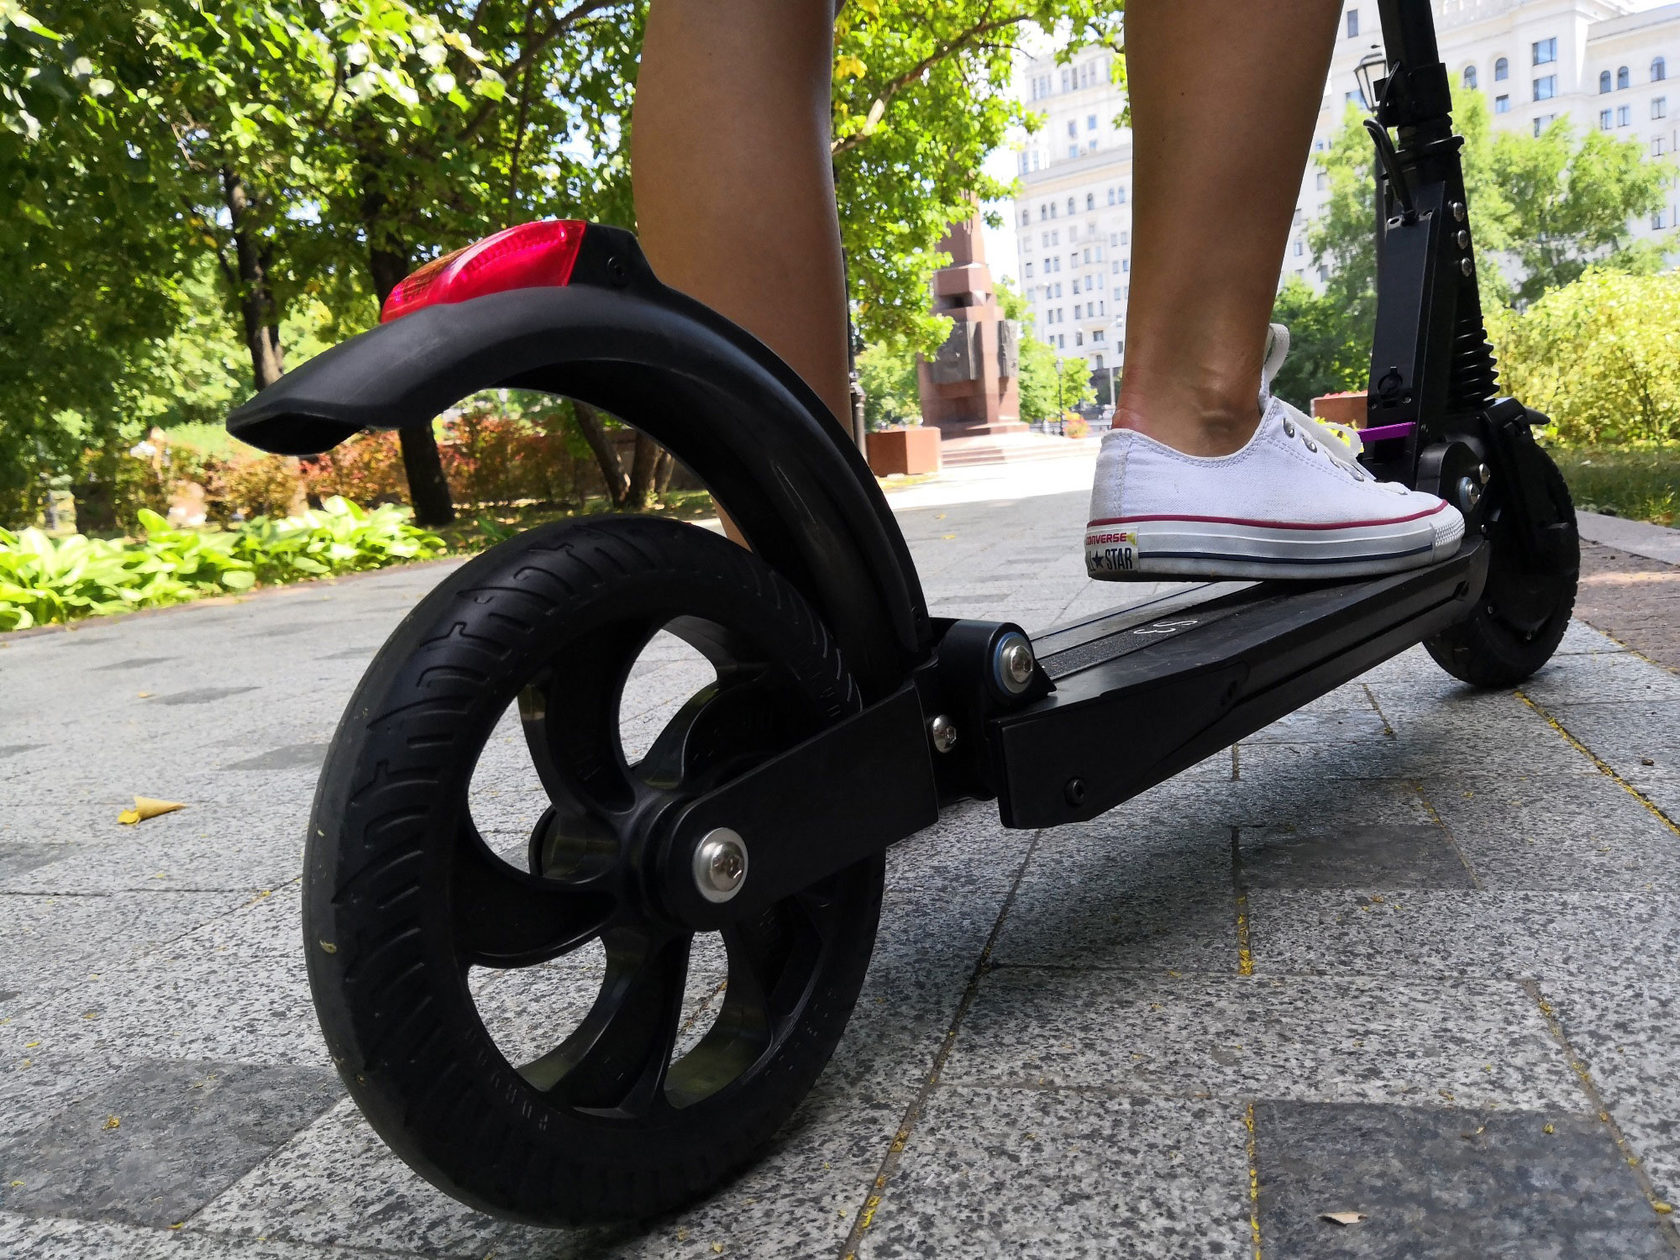 Off-road electric scooter ranking in 2022